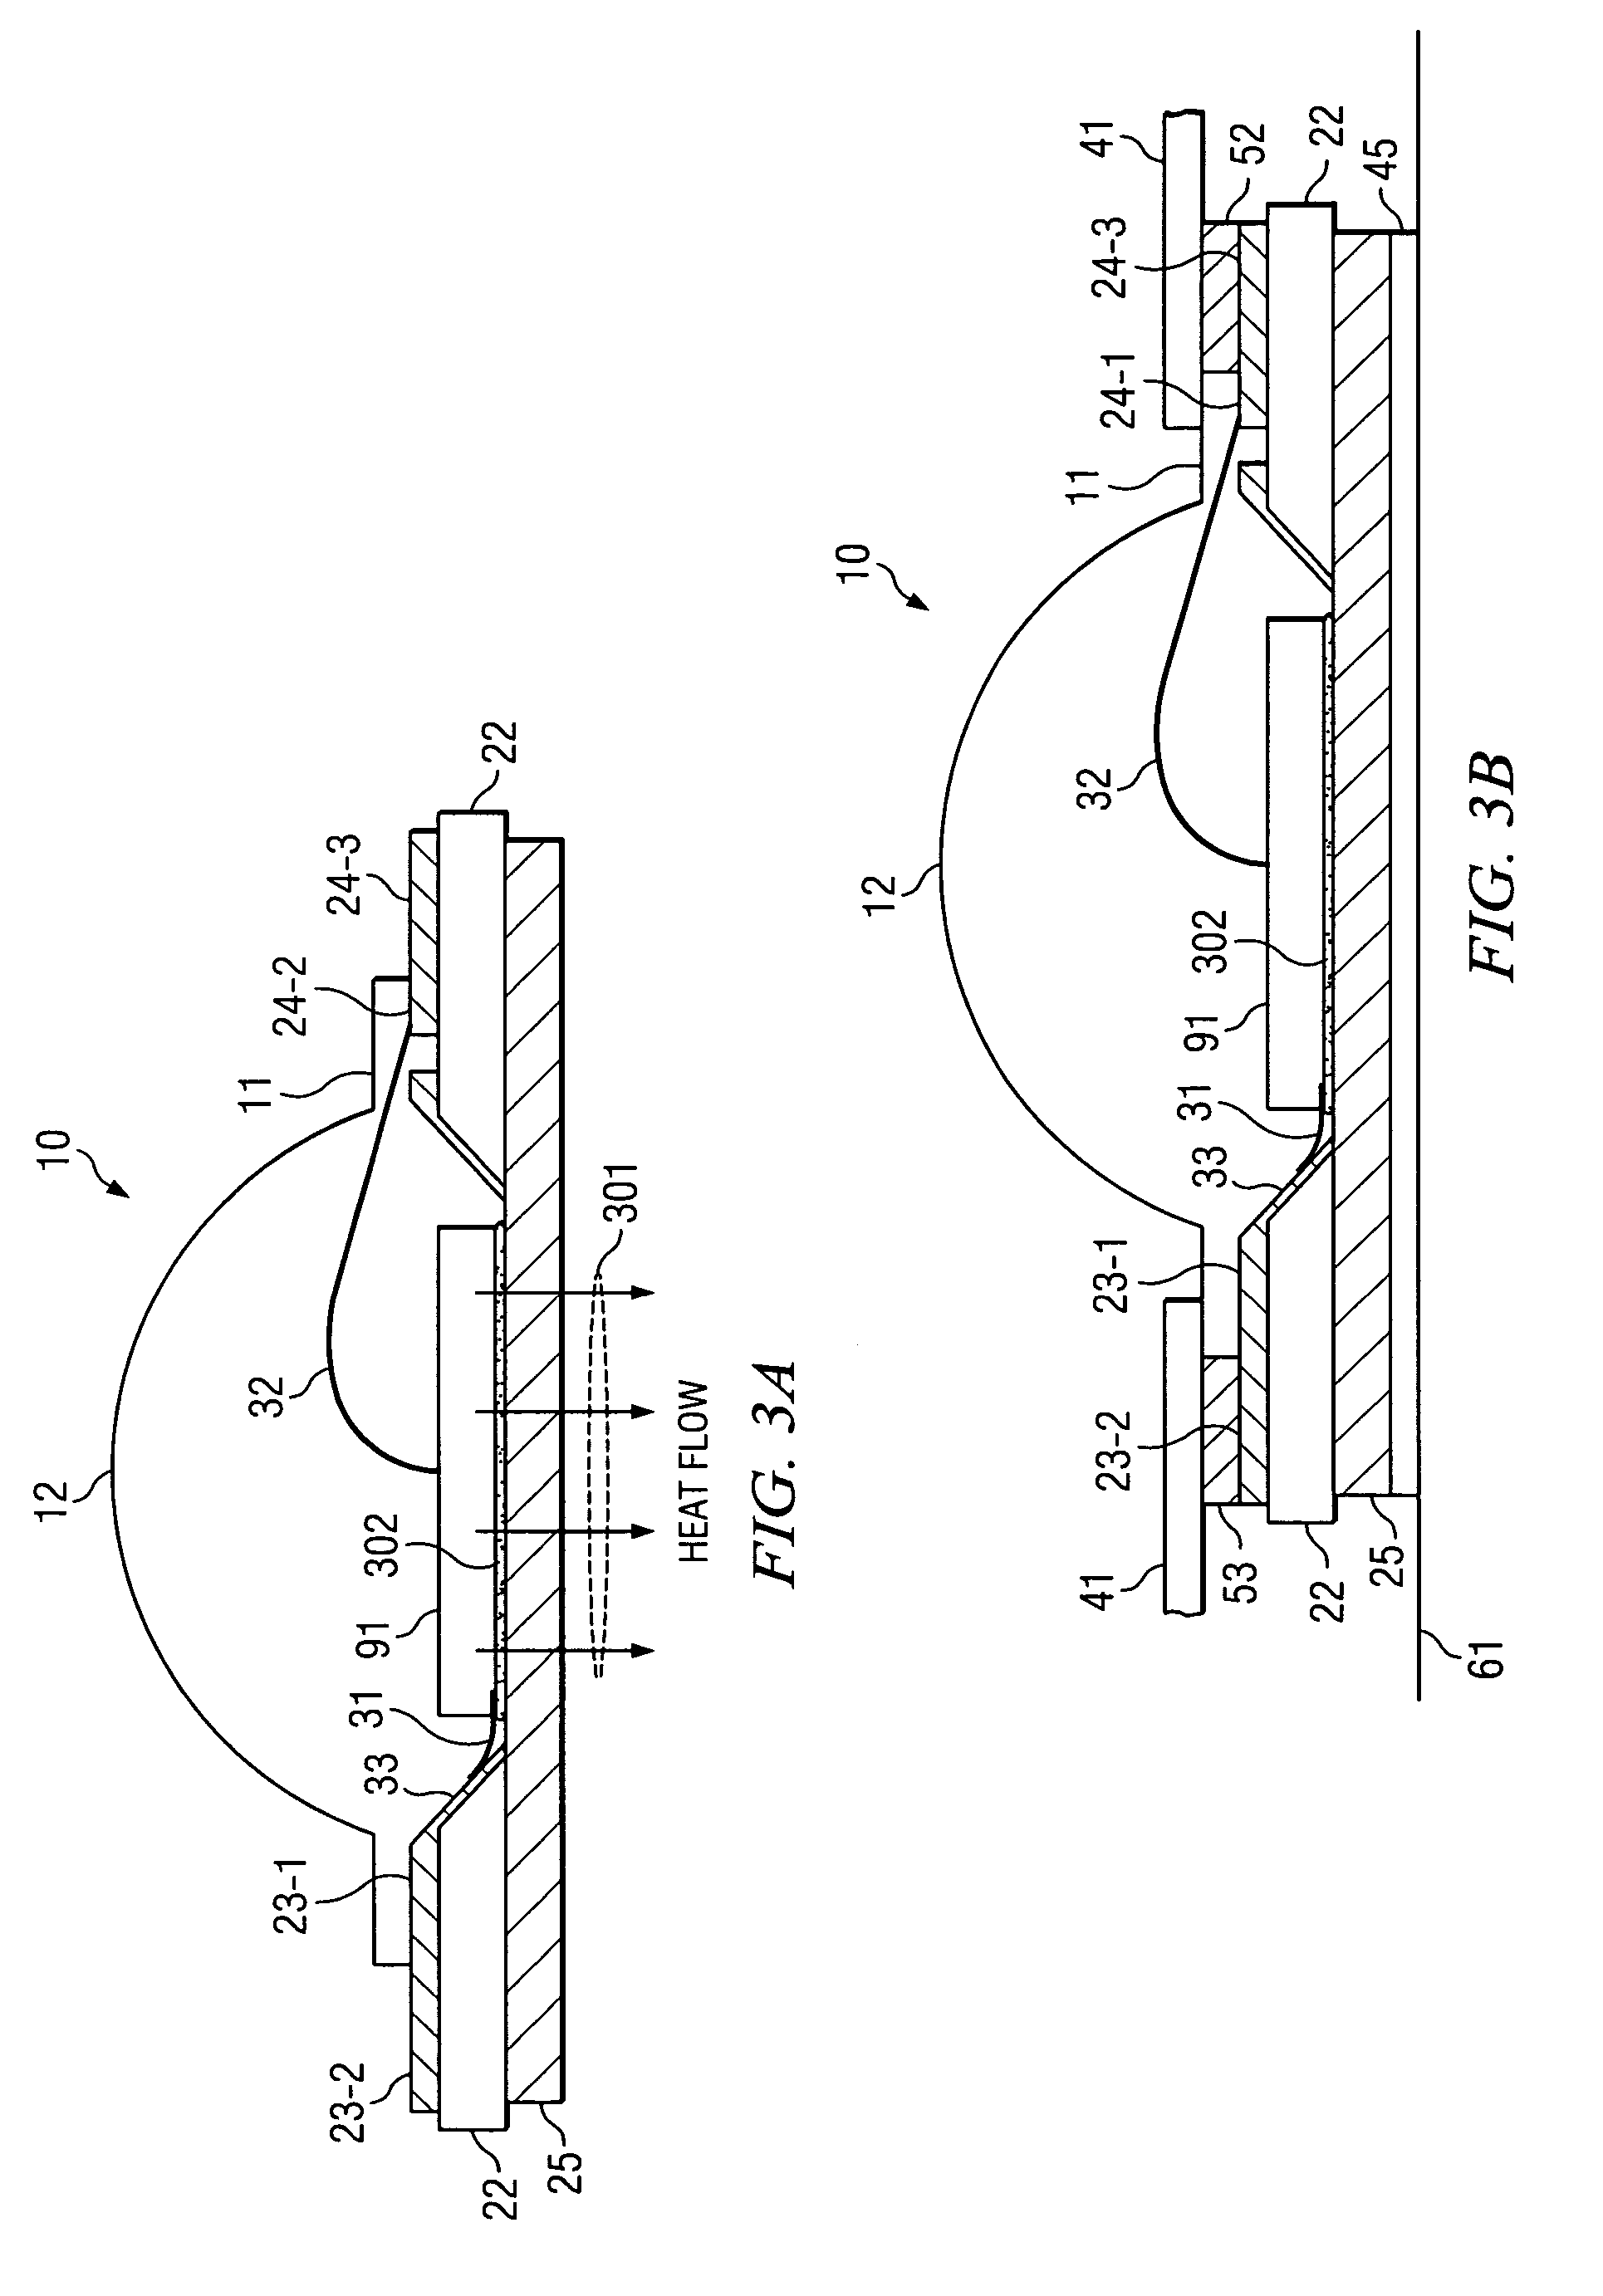 LED mounting having increased heat dissipation